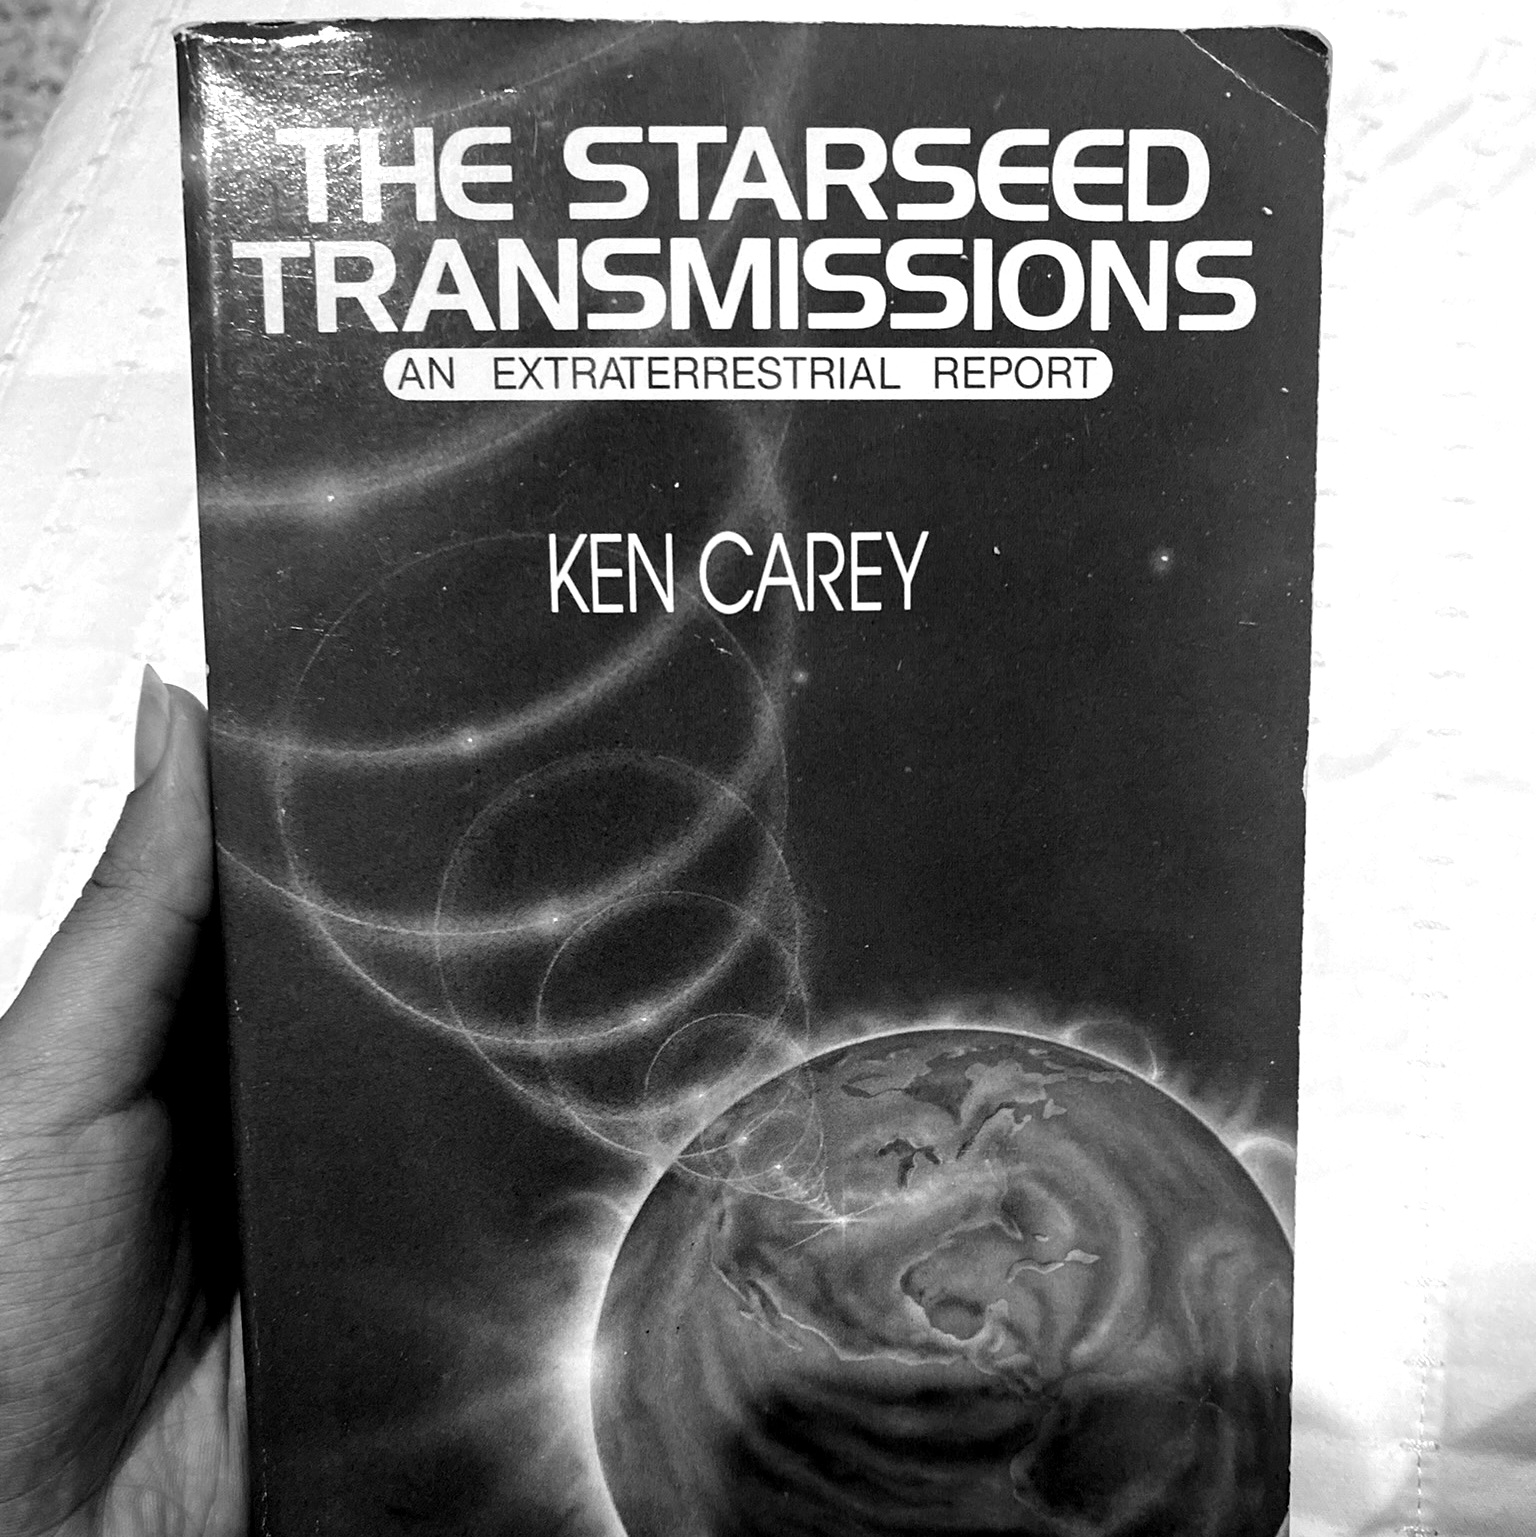 Notes from “The Starseed Transmissions” by Ken Carey